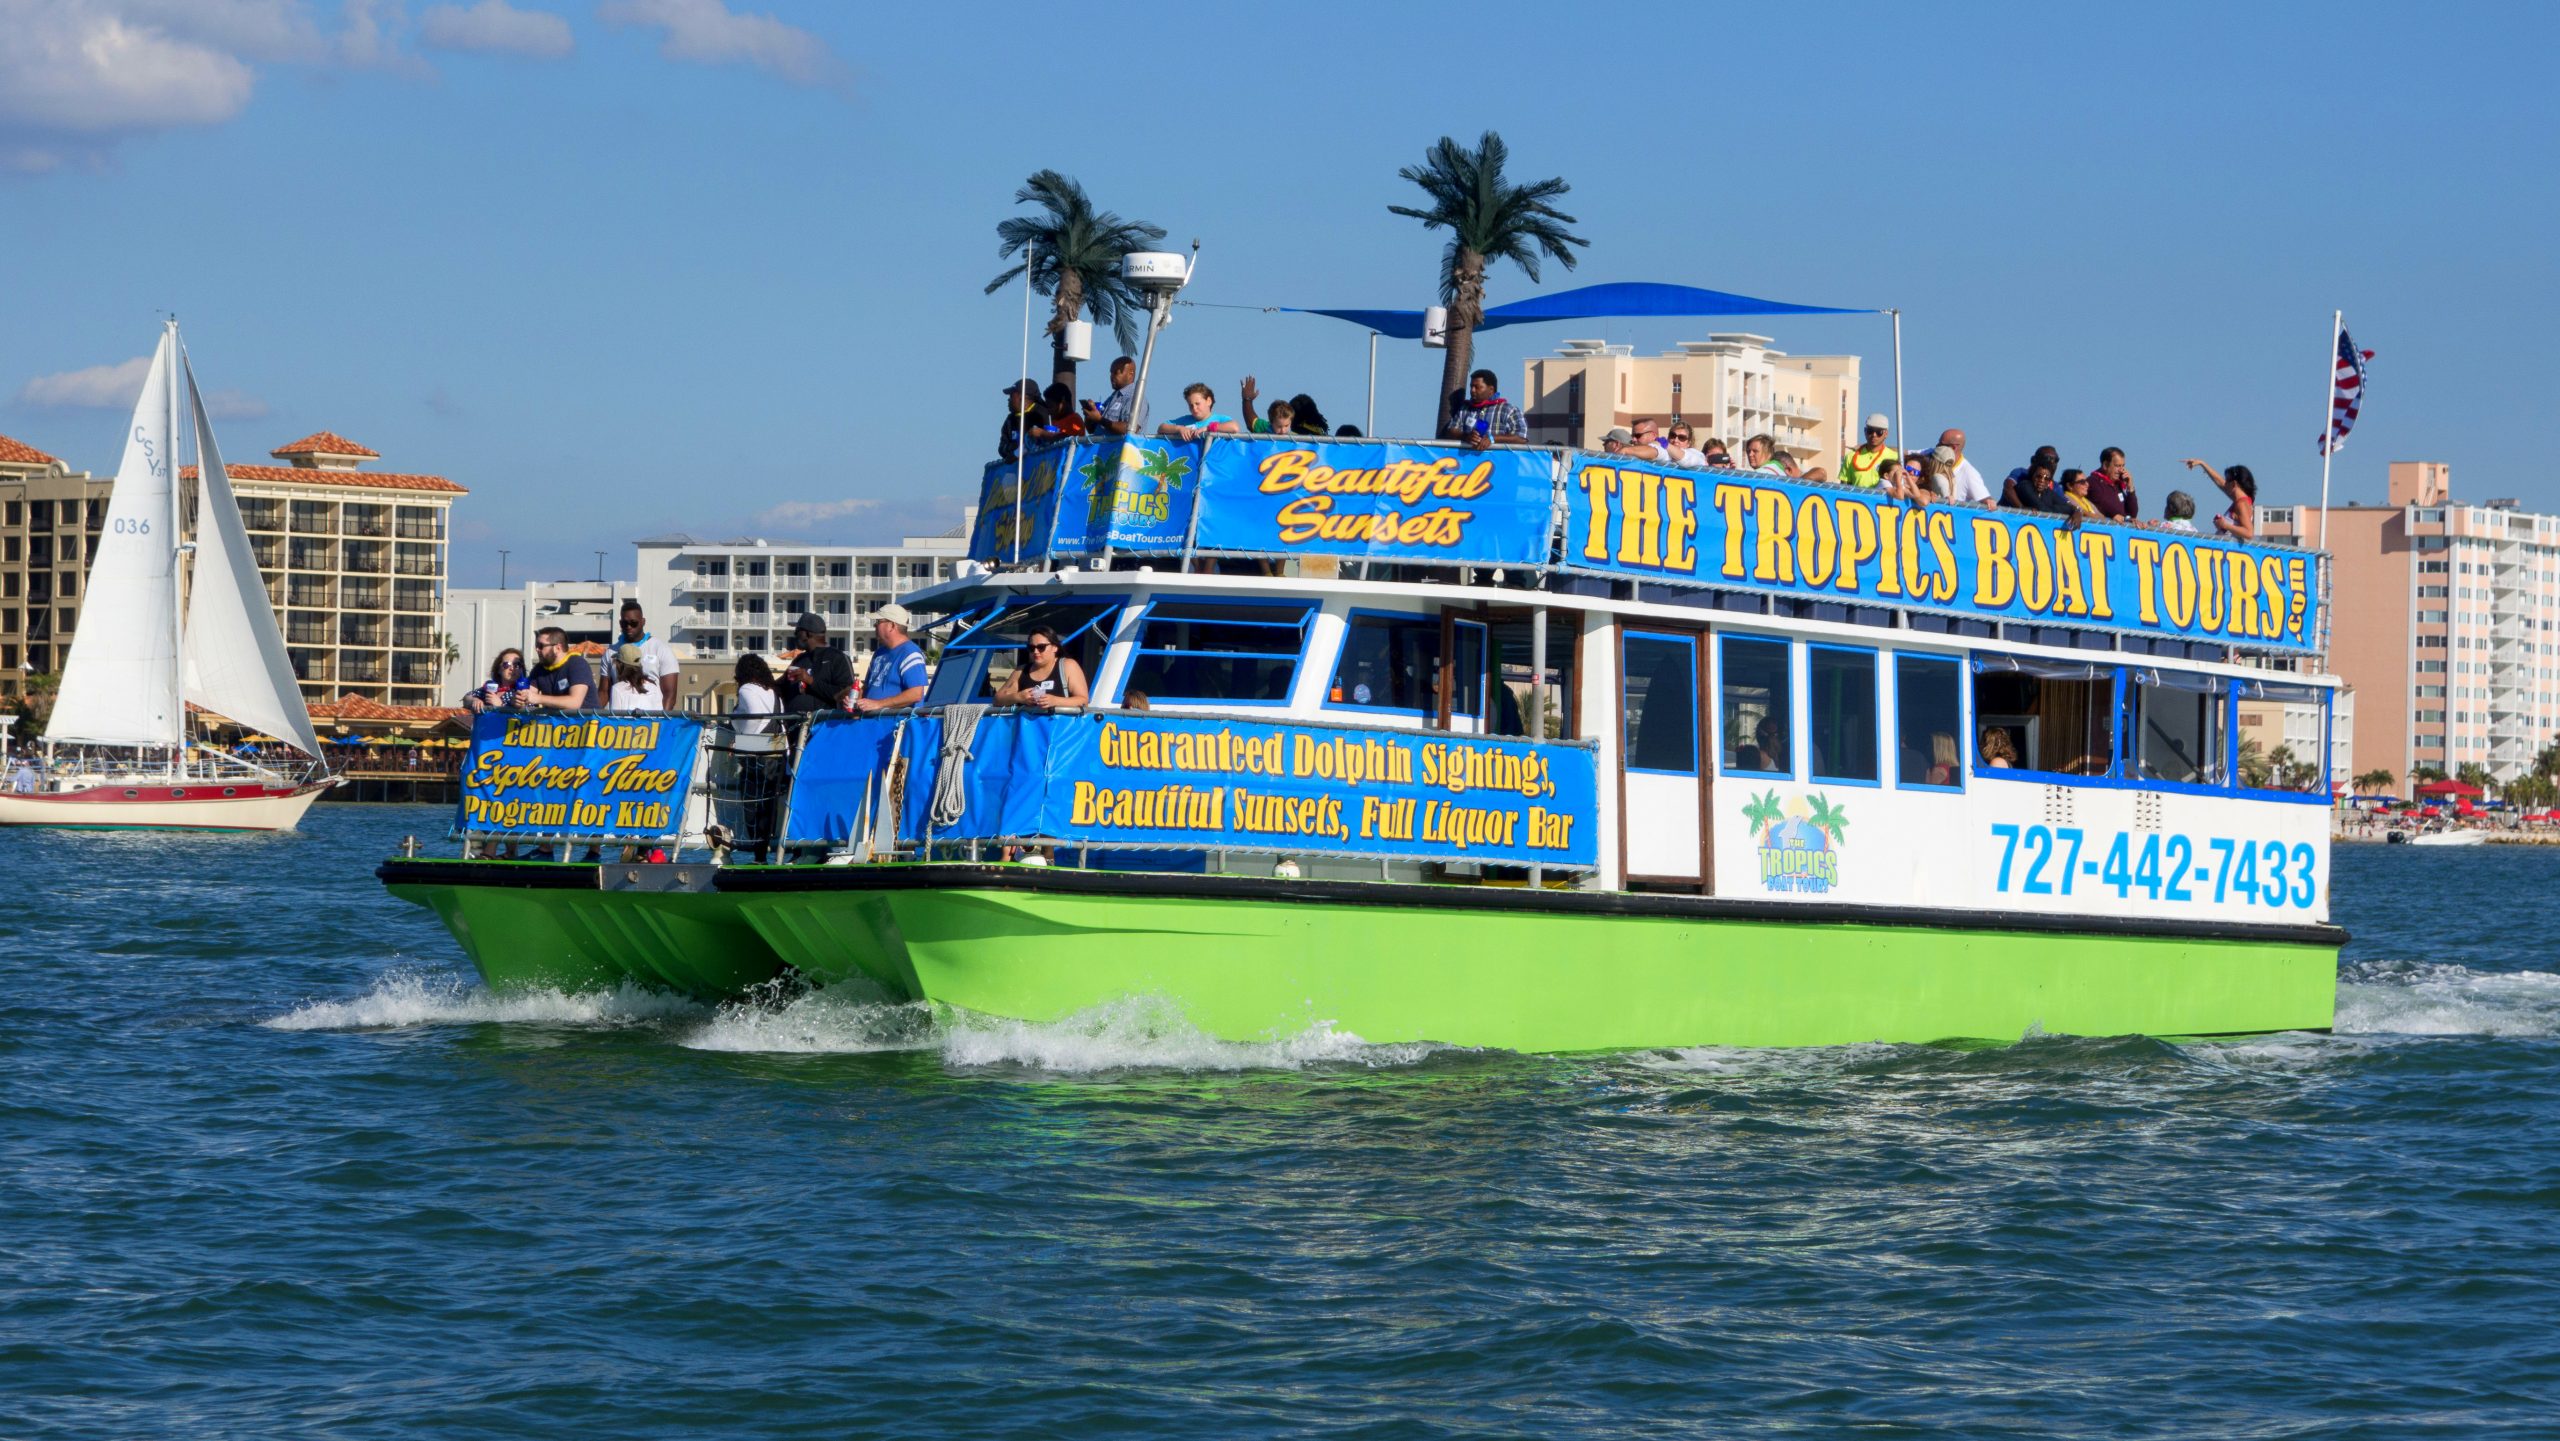 3 Fun Boat Tours In Clearwater Beach The Tropics Boat Tours